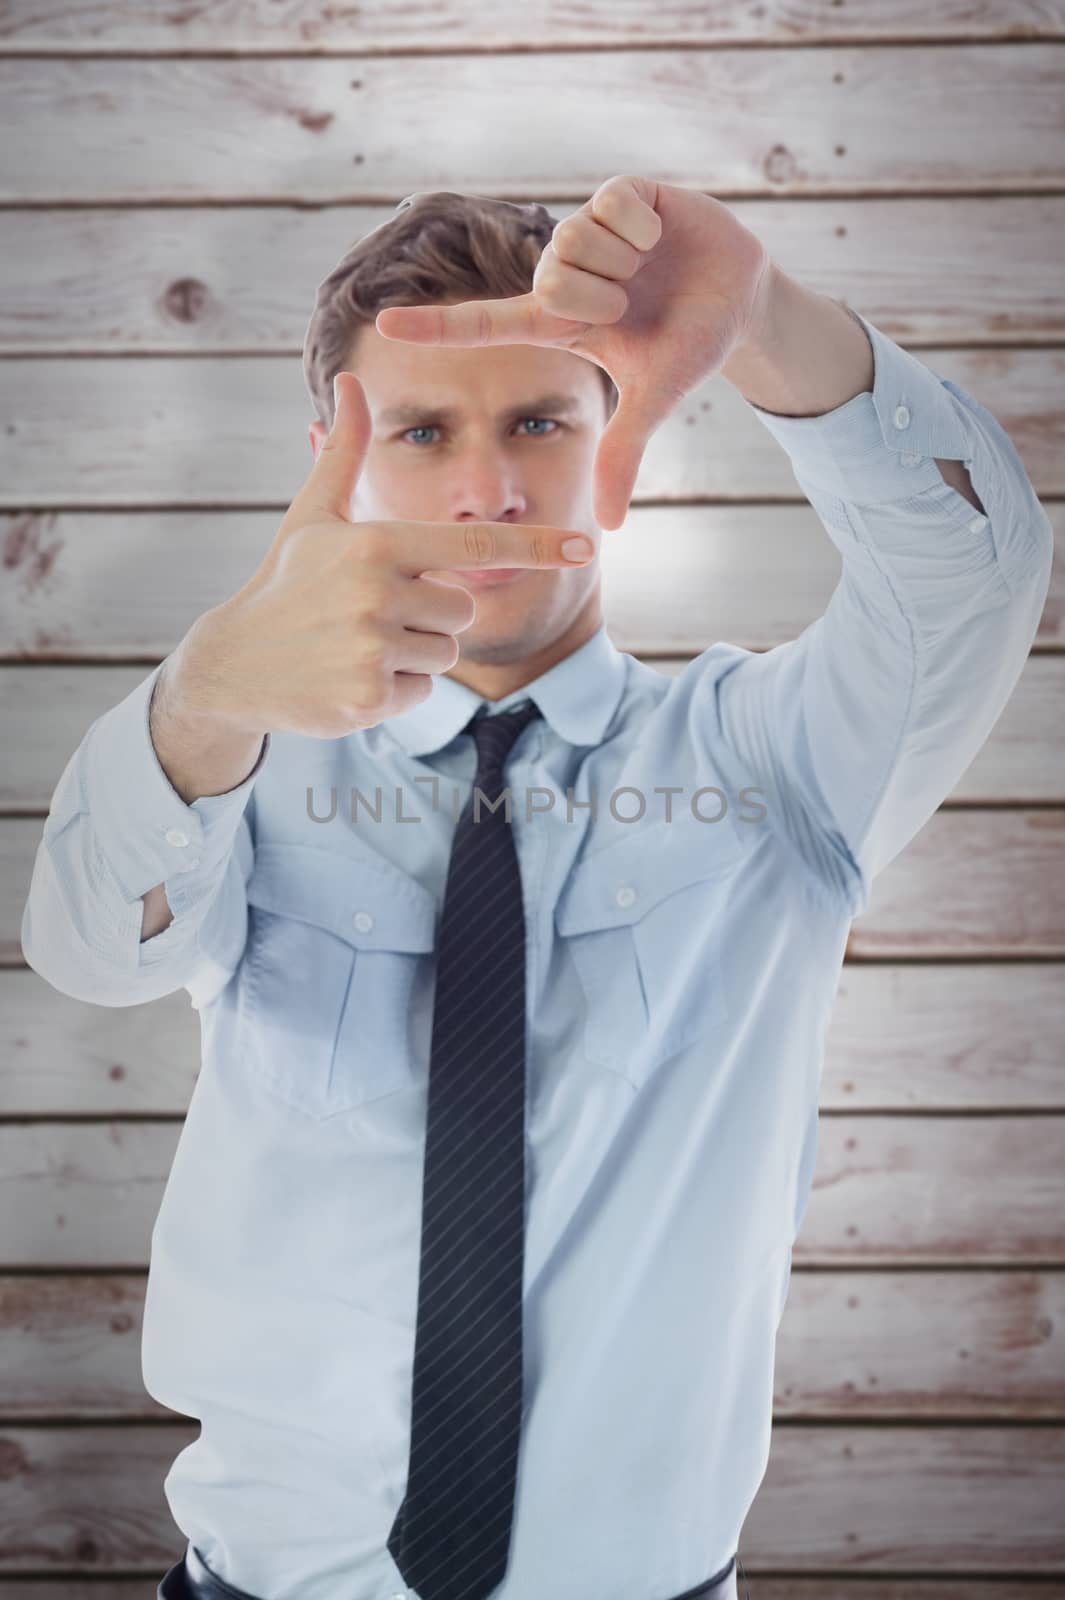 Businessman making frame with hands against wooden planks